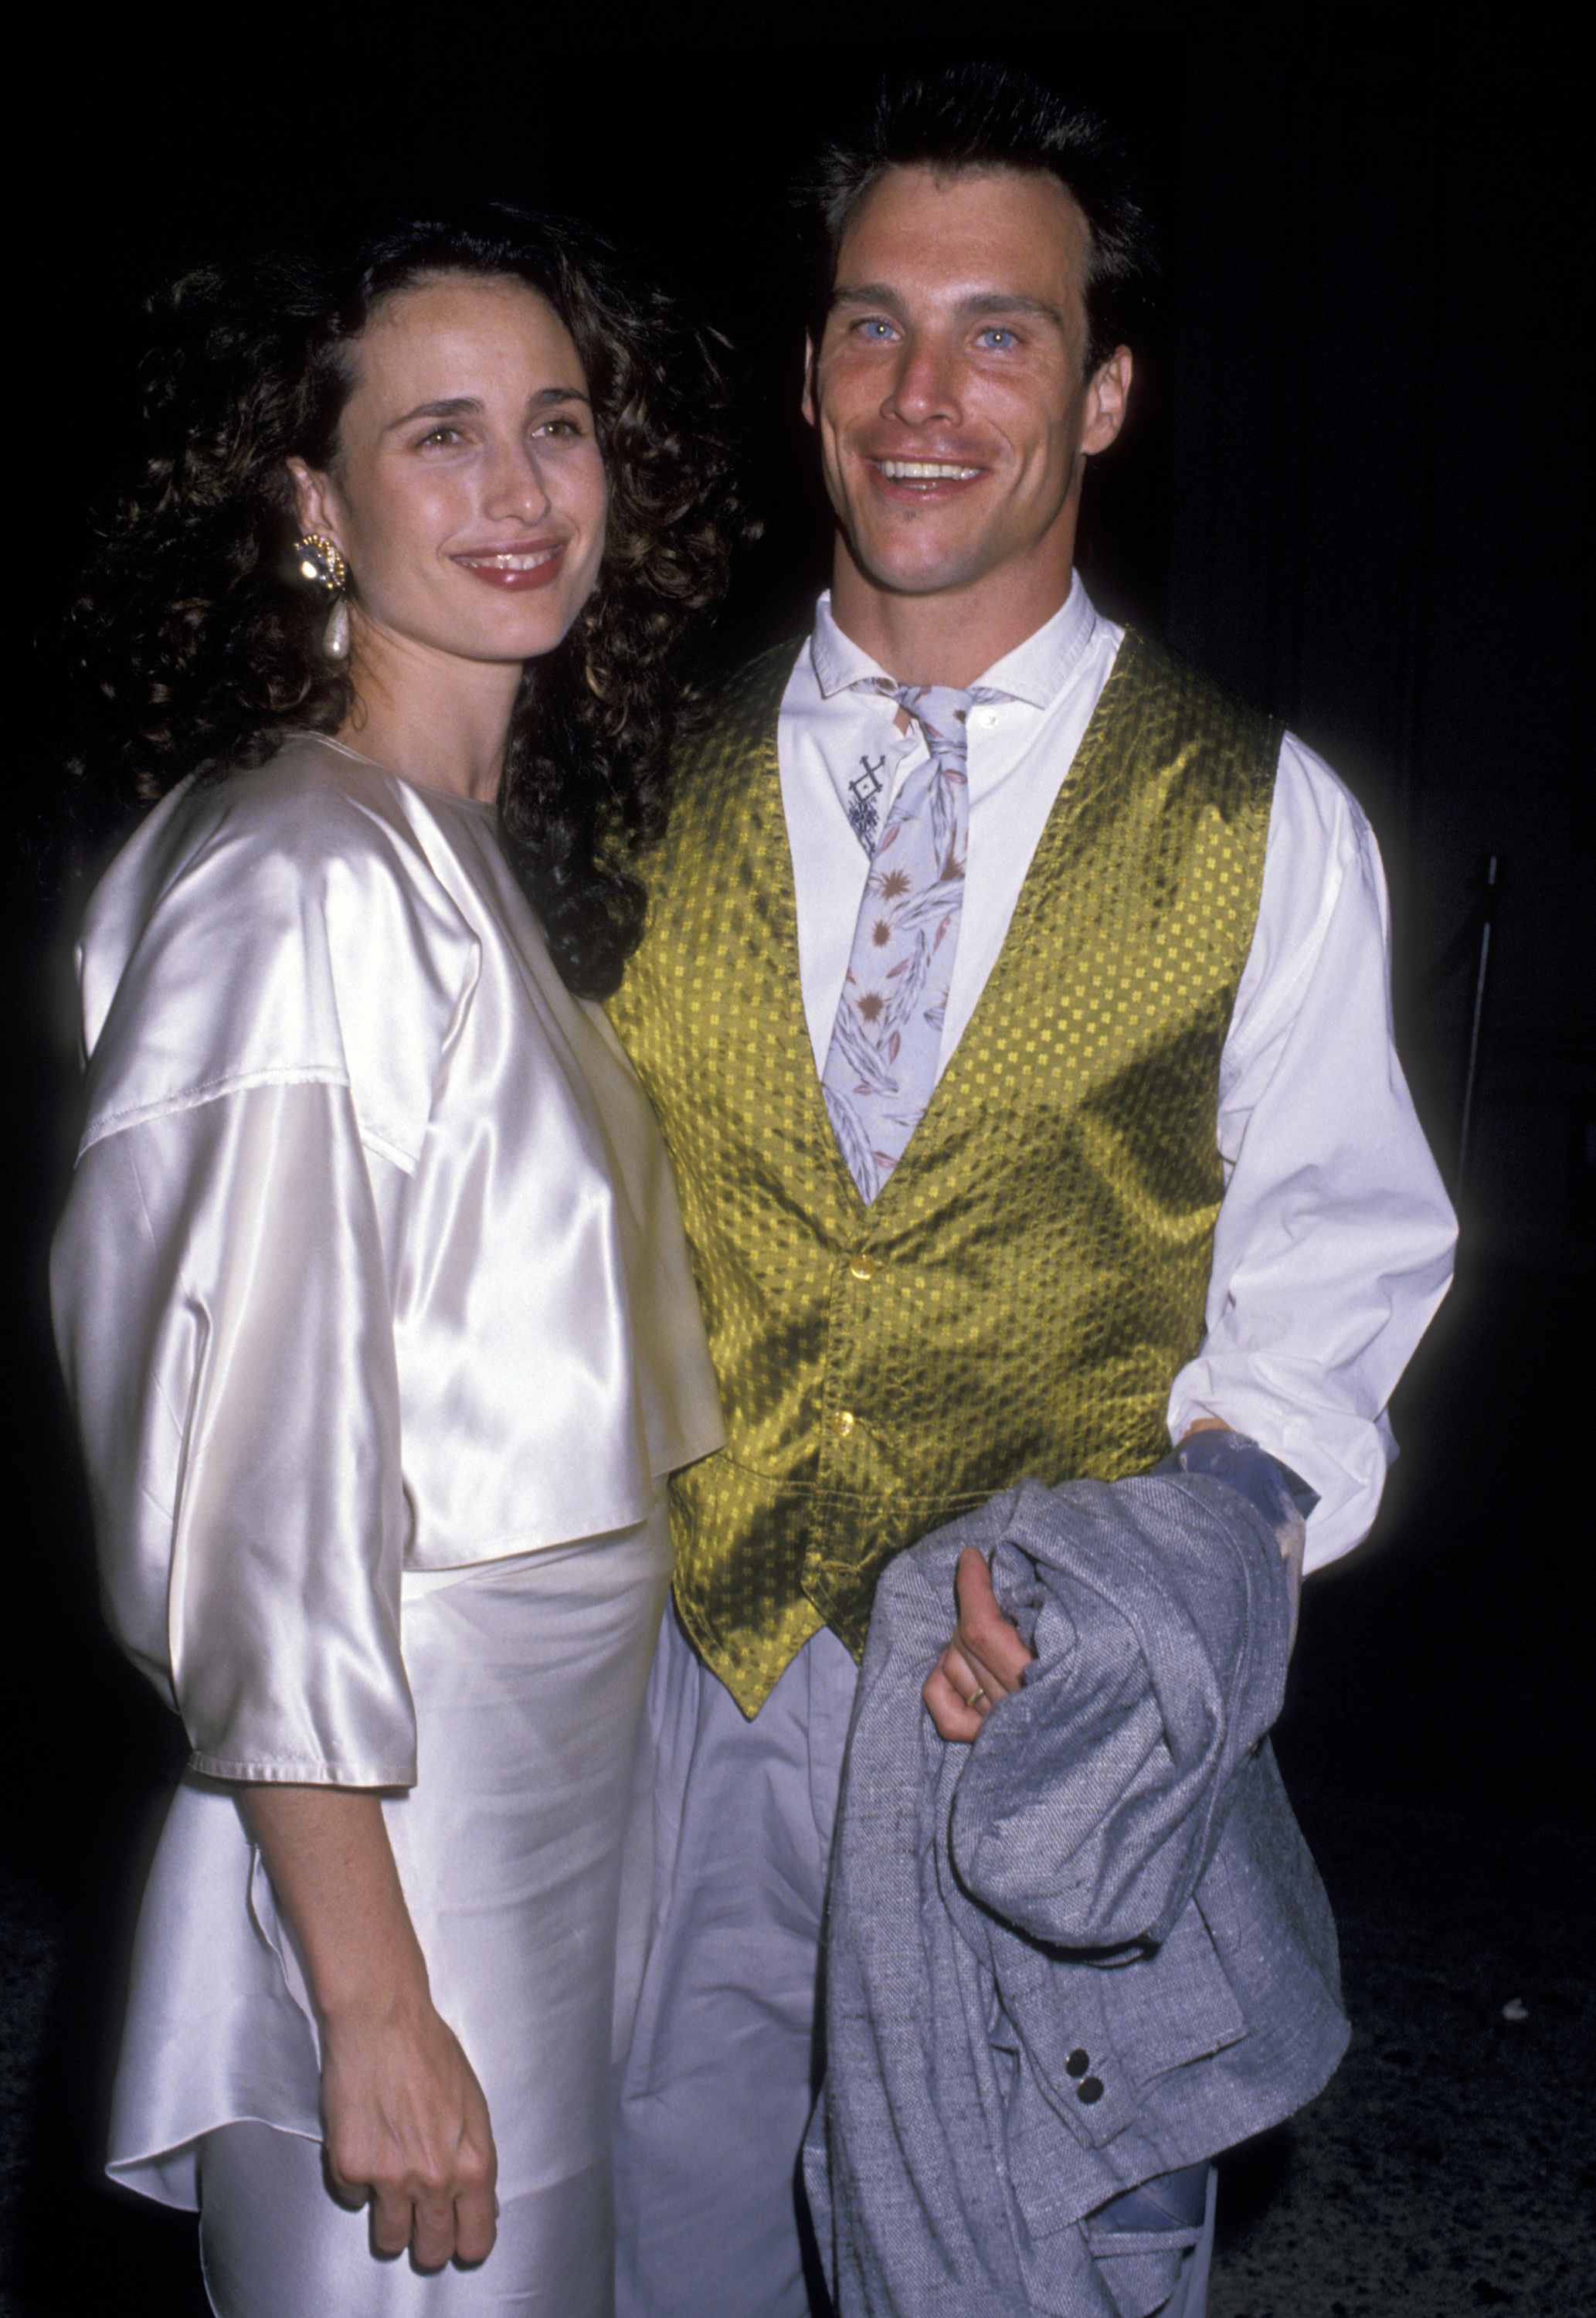 Andie MacDowell and Paul Qualley during "Sex, Lies, and Videotape's" New York City premiere party in New York City, in 1989 | Source: Getty Images